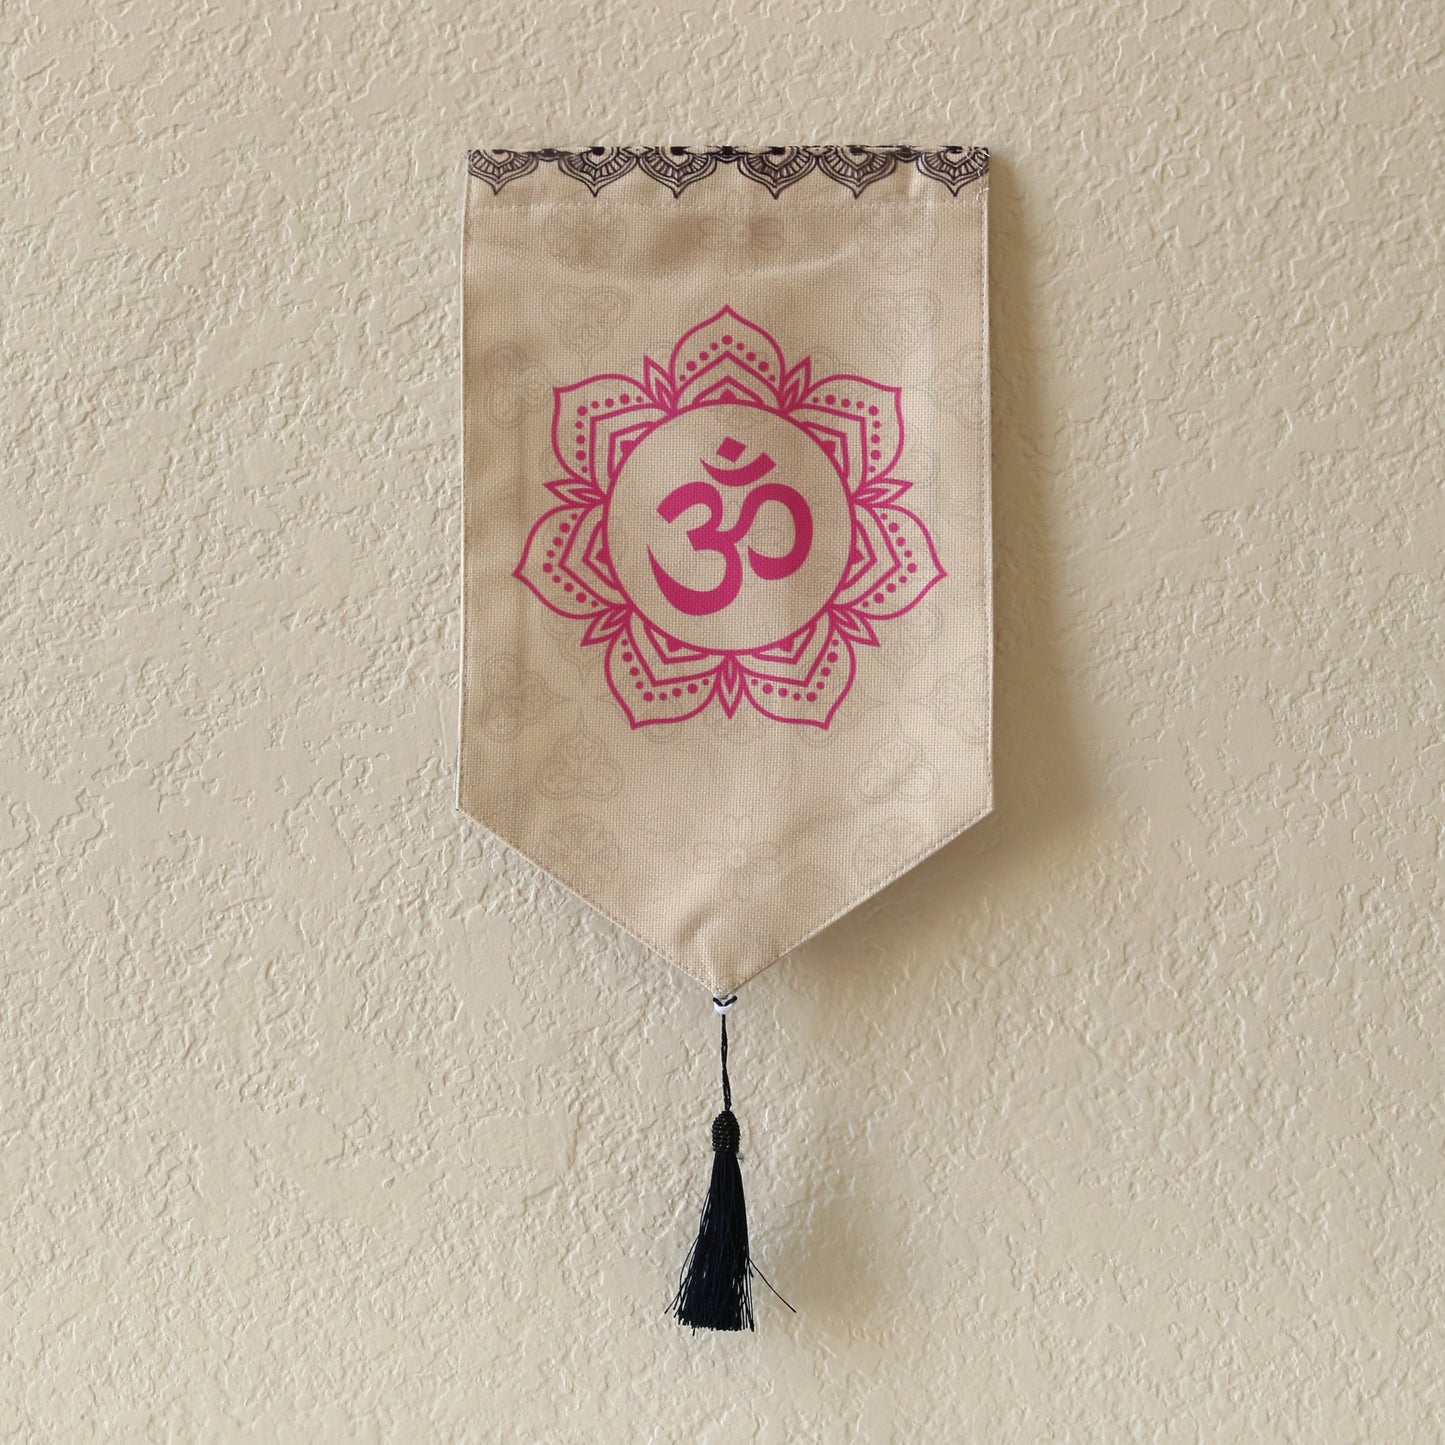 Yoga Meditation Small Canvas Tapestry Wall Hanging, 9.5"X16", Buddhist Om Asian Chinese Indian Wall Art Decor